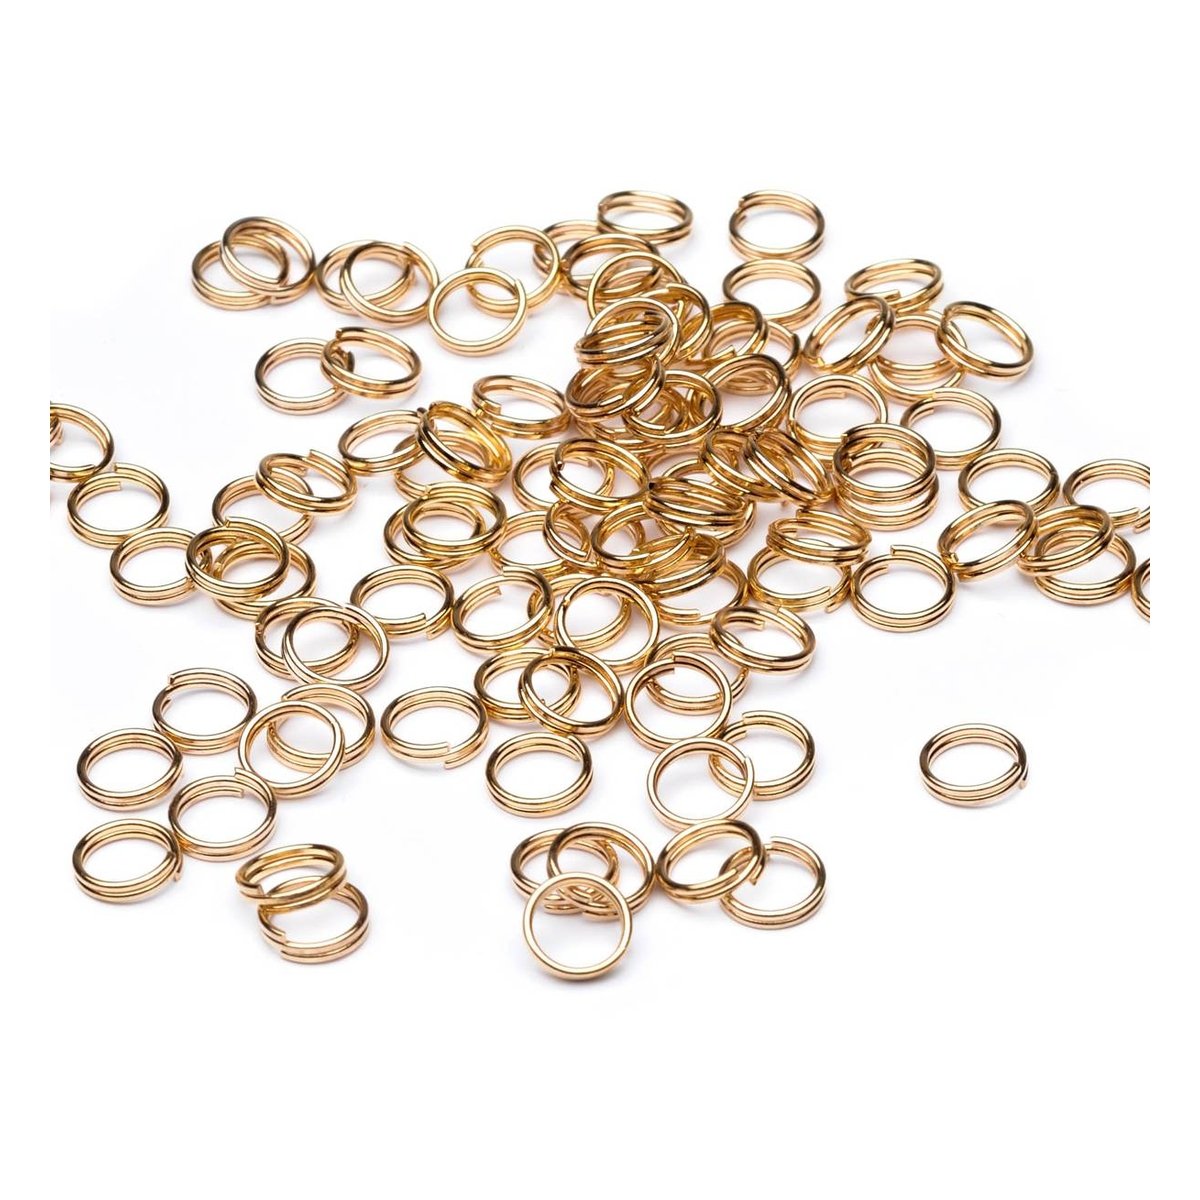 Beads Unlimited Gold Plated Split Rings 70 Pack